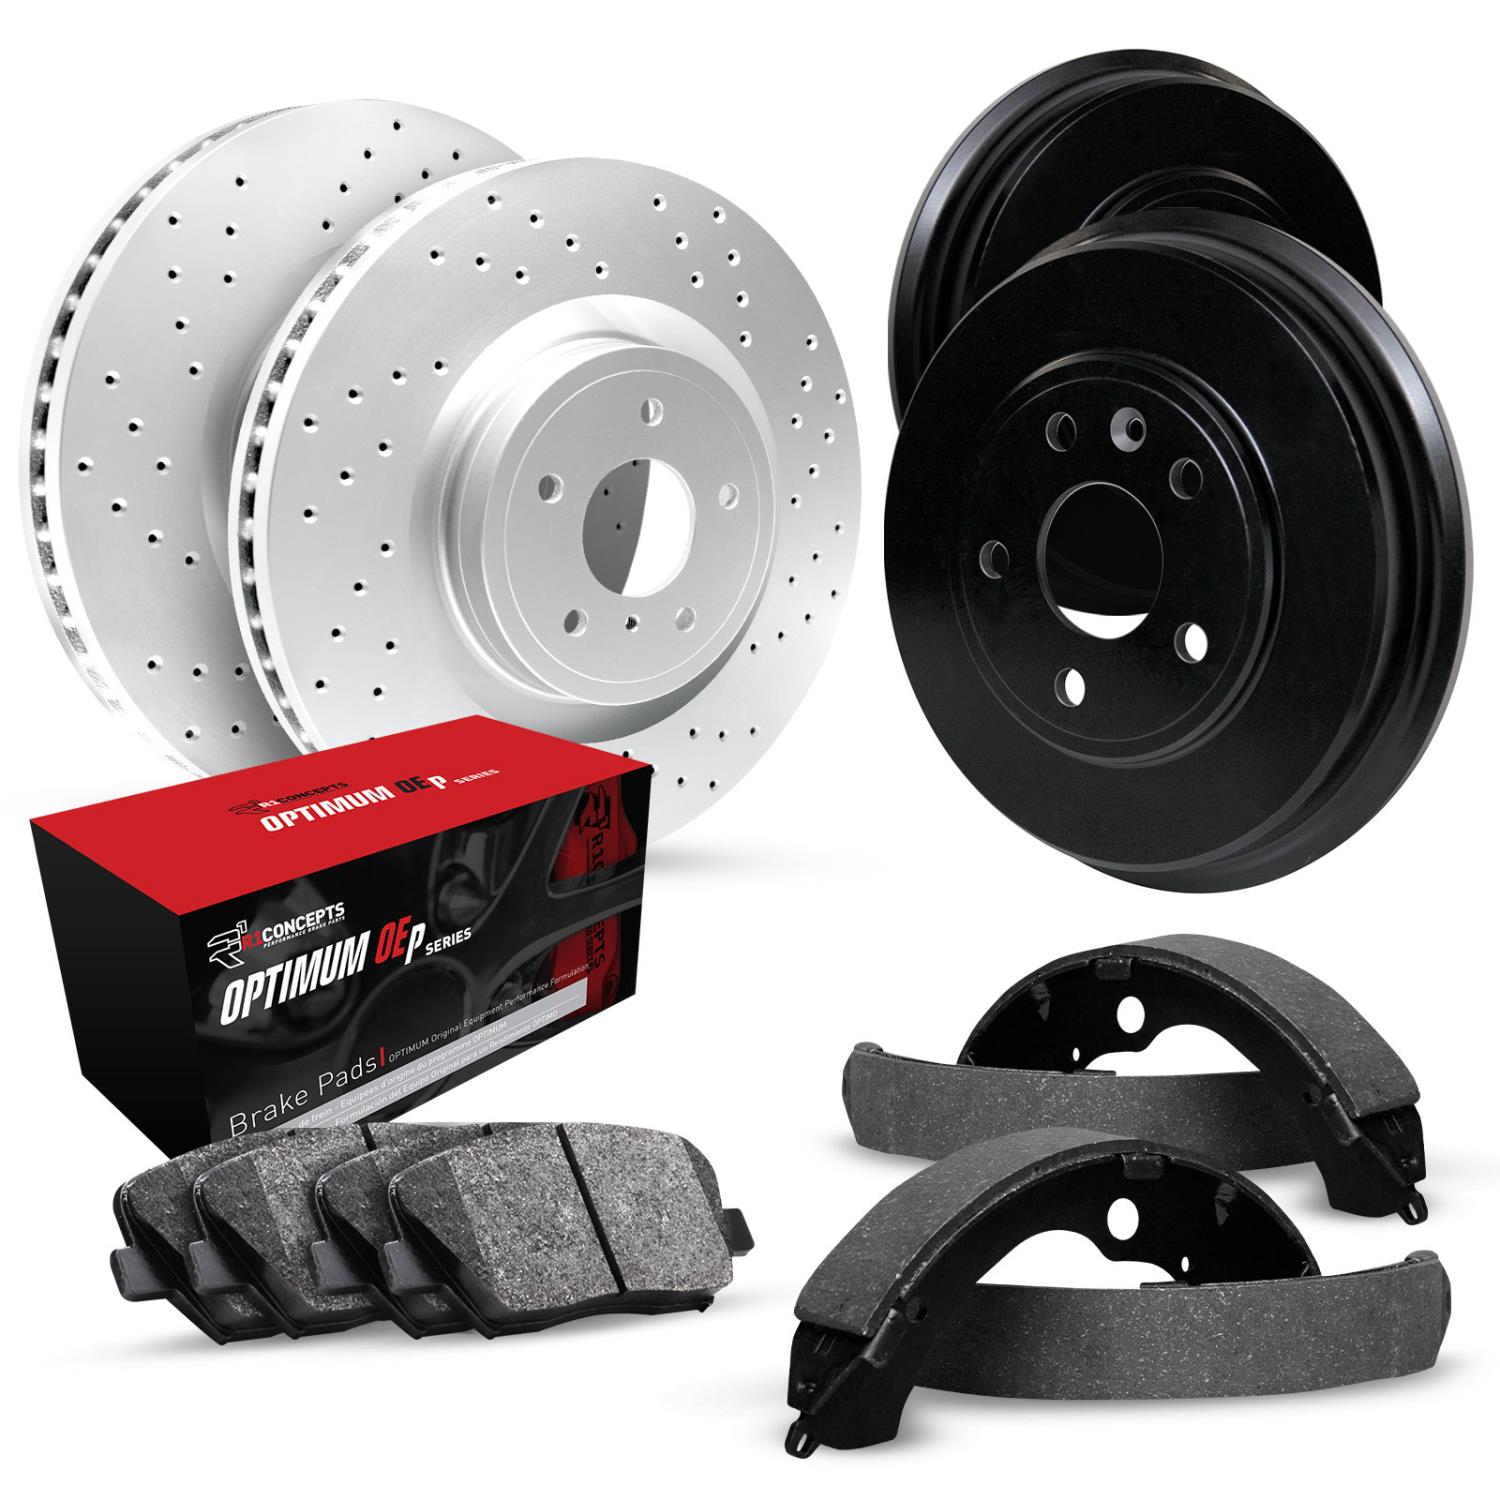 GEO-Carbon Drilled Brake Rotor & Drum Set w/Optimum OE Pads & Shoes, 1984-1984 GM, Position: Front & Rear